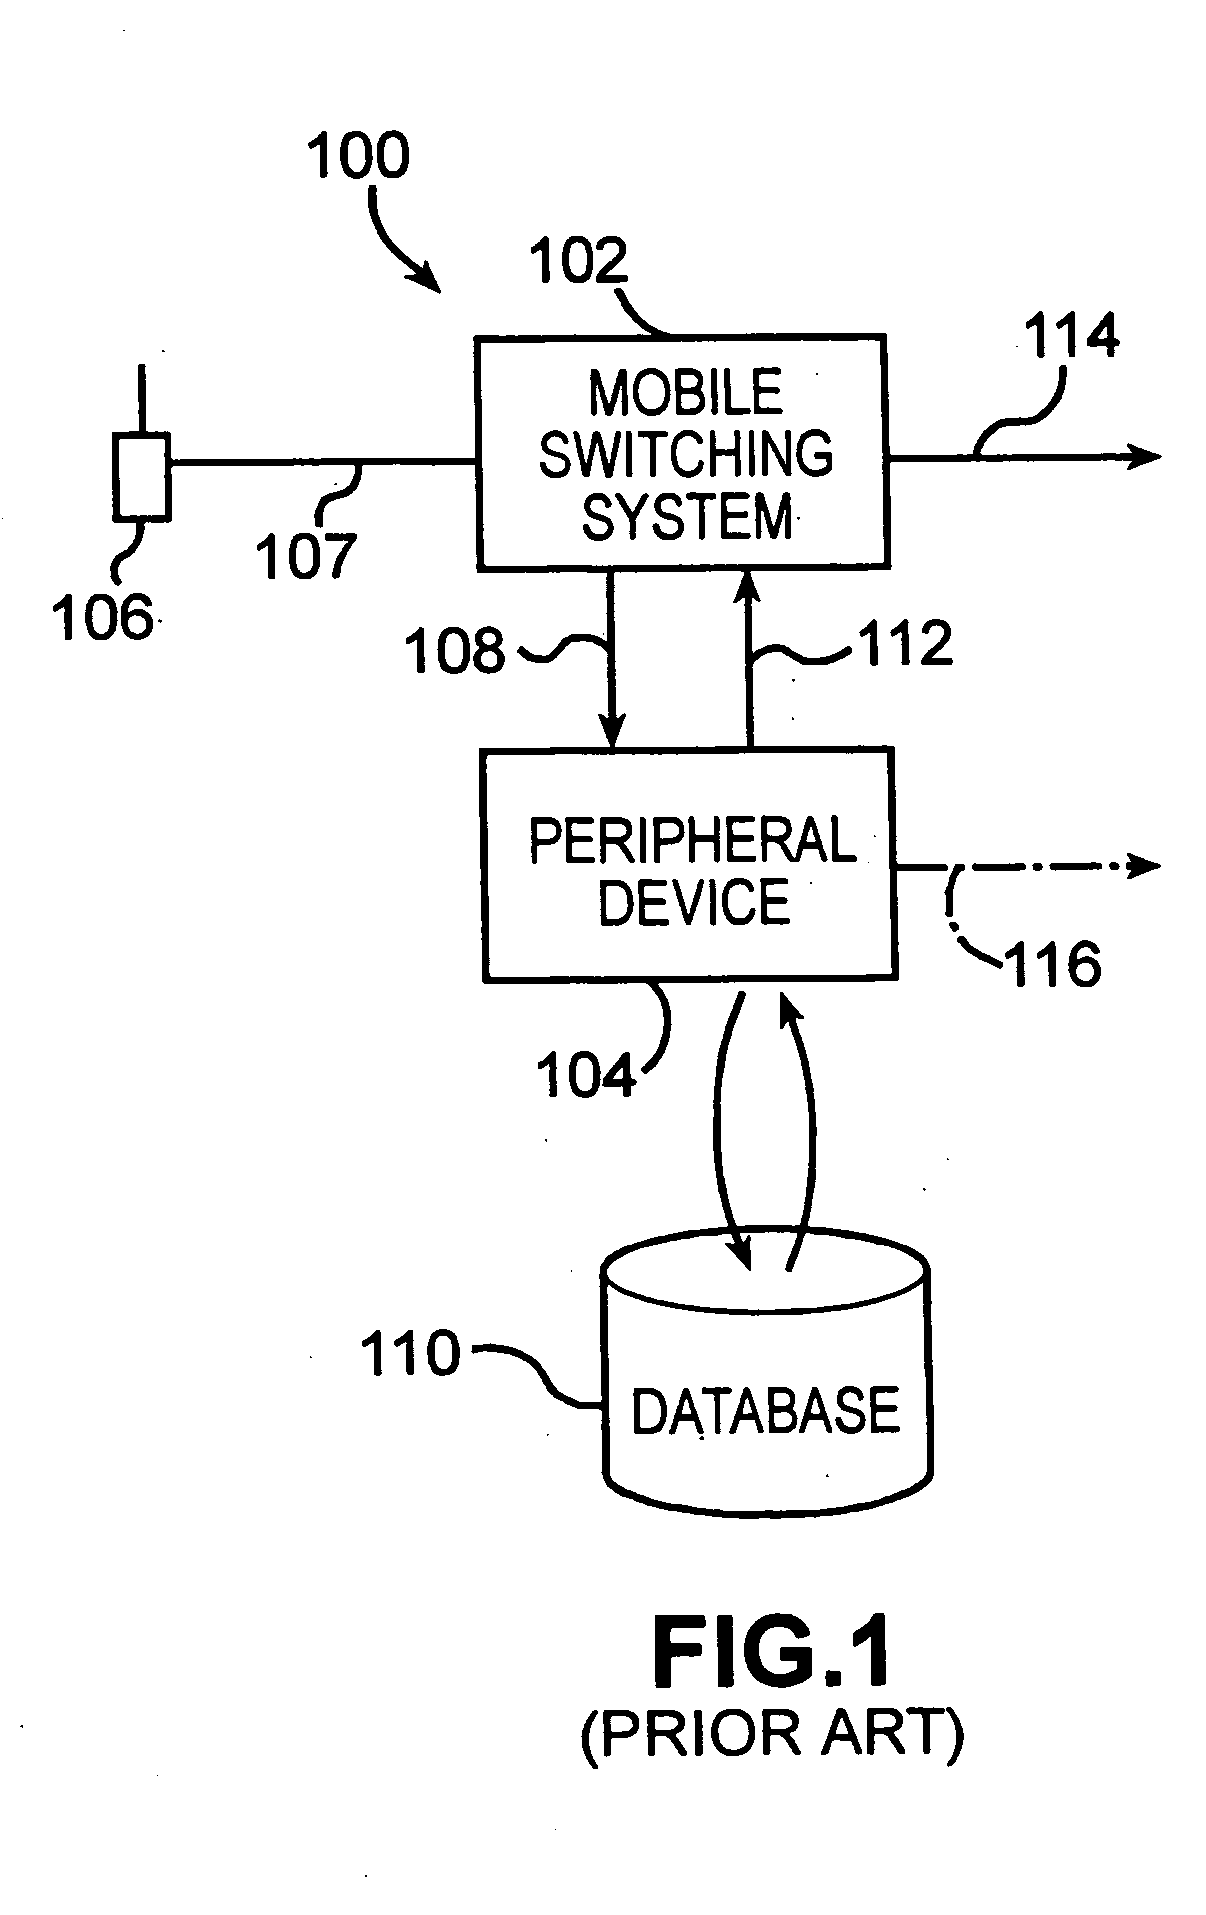 Pre-paid wireless interactive voice response system with variable announdements